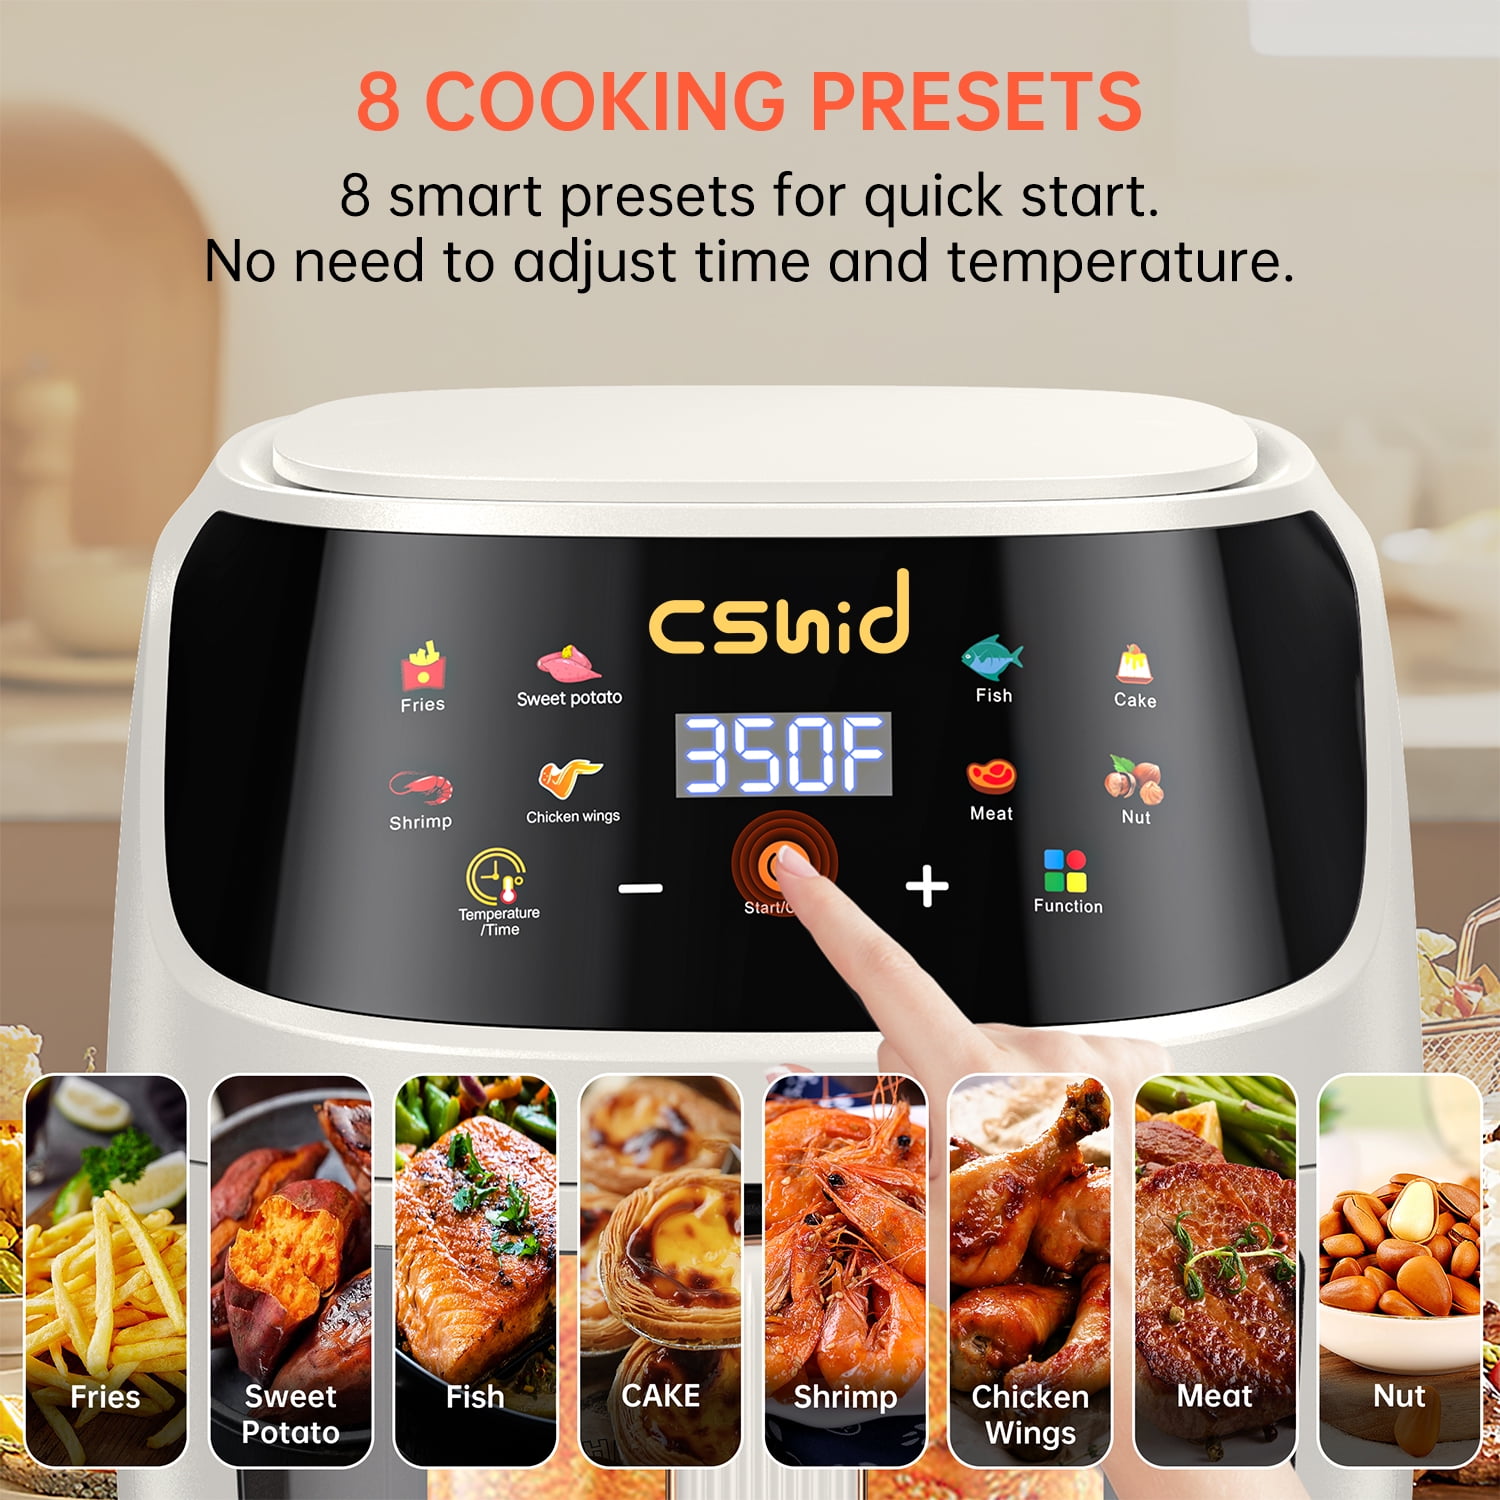 Fryer 5L Large Capacity Touch Screen Fryers Household Multi-function Window Visible Air fryer that Crisps, Reheats, & Dehydrates,Including Air Fryer Paper Liners 50PCS,White - Walmart.com